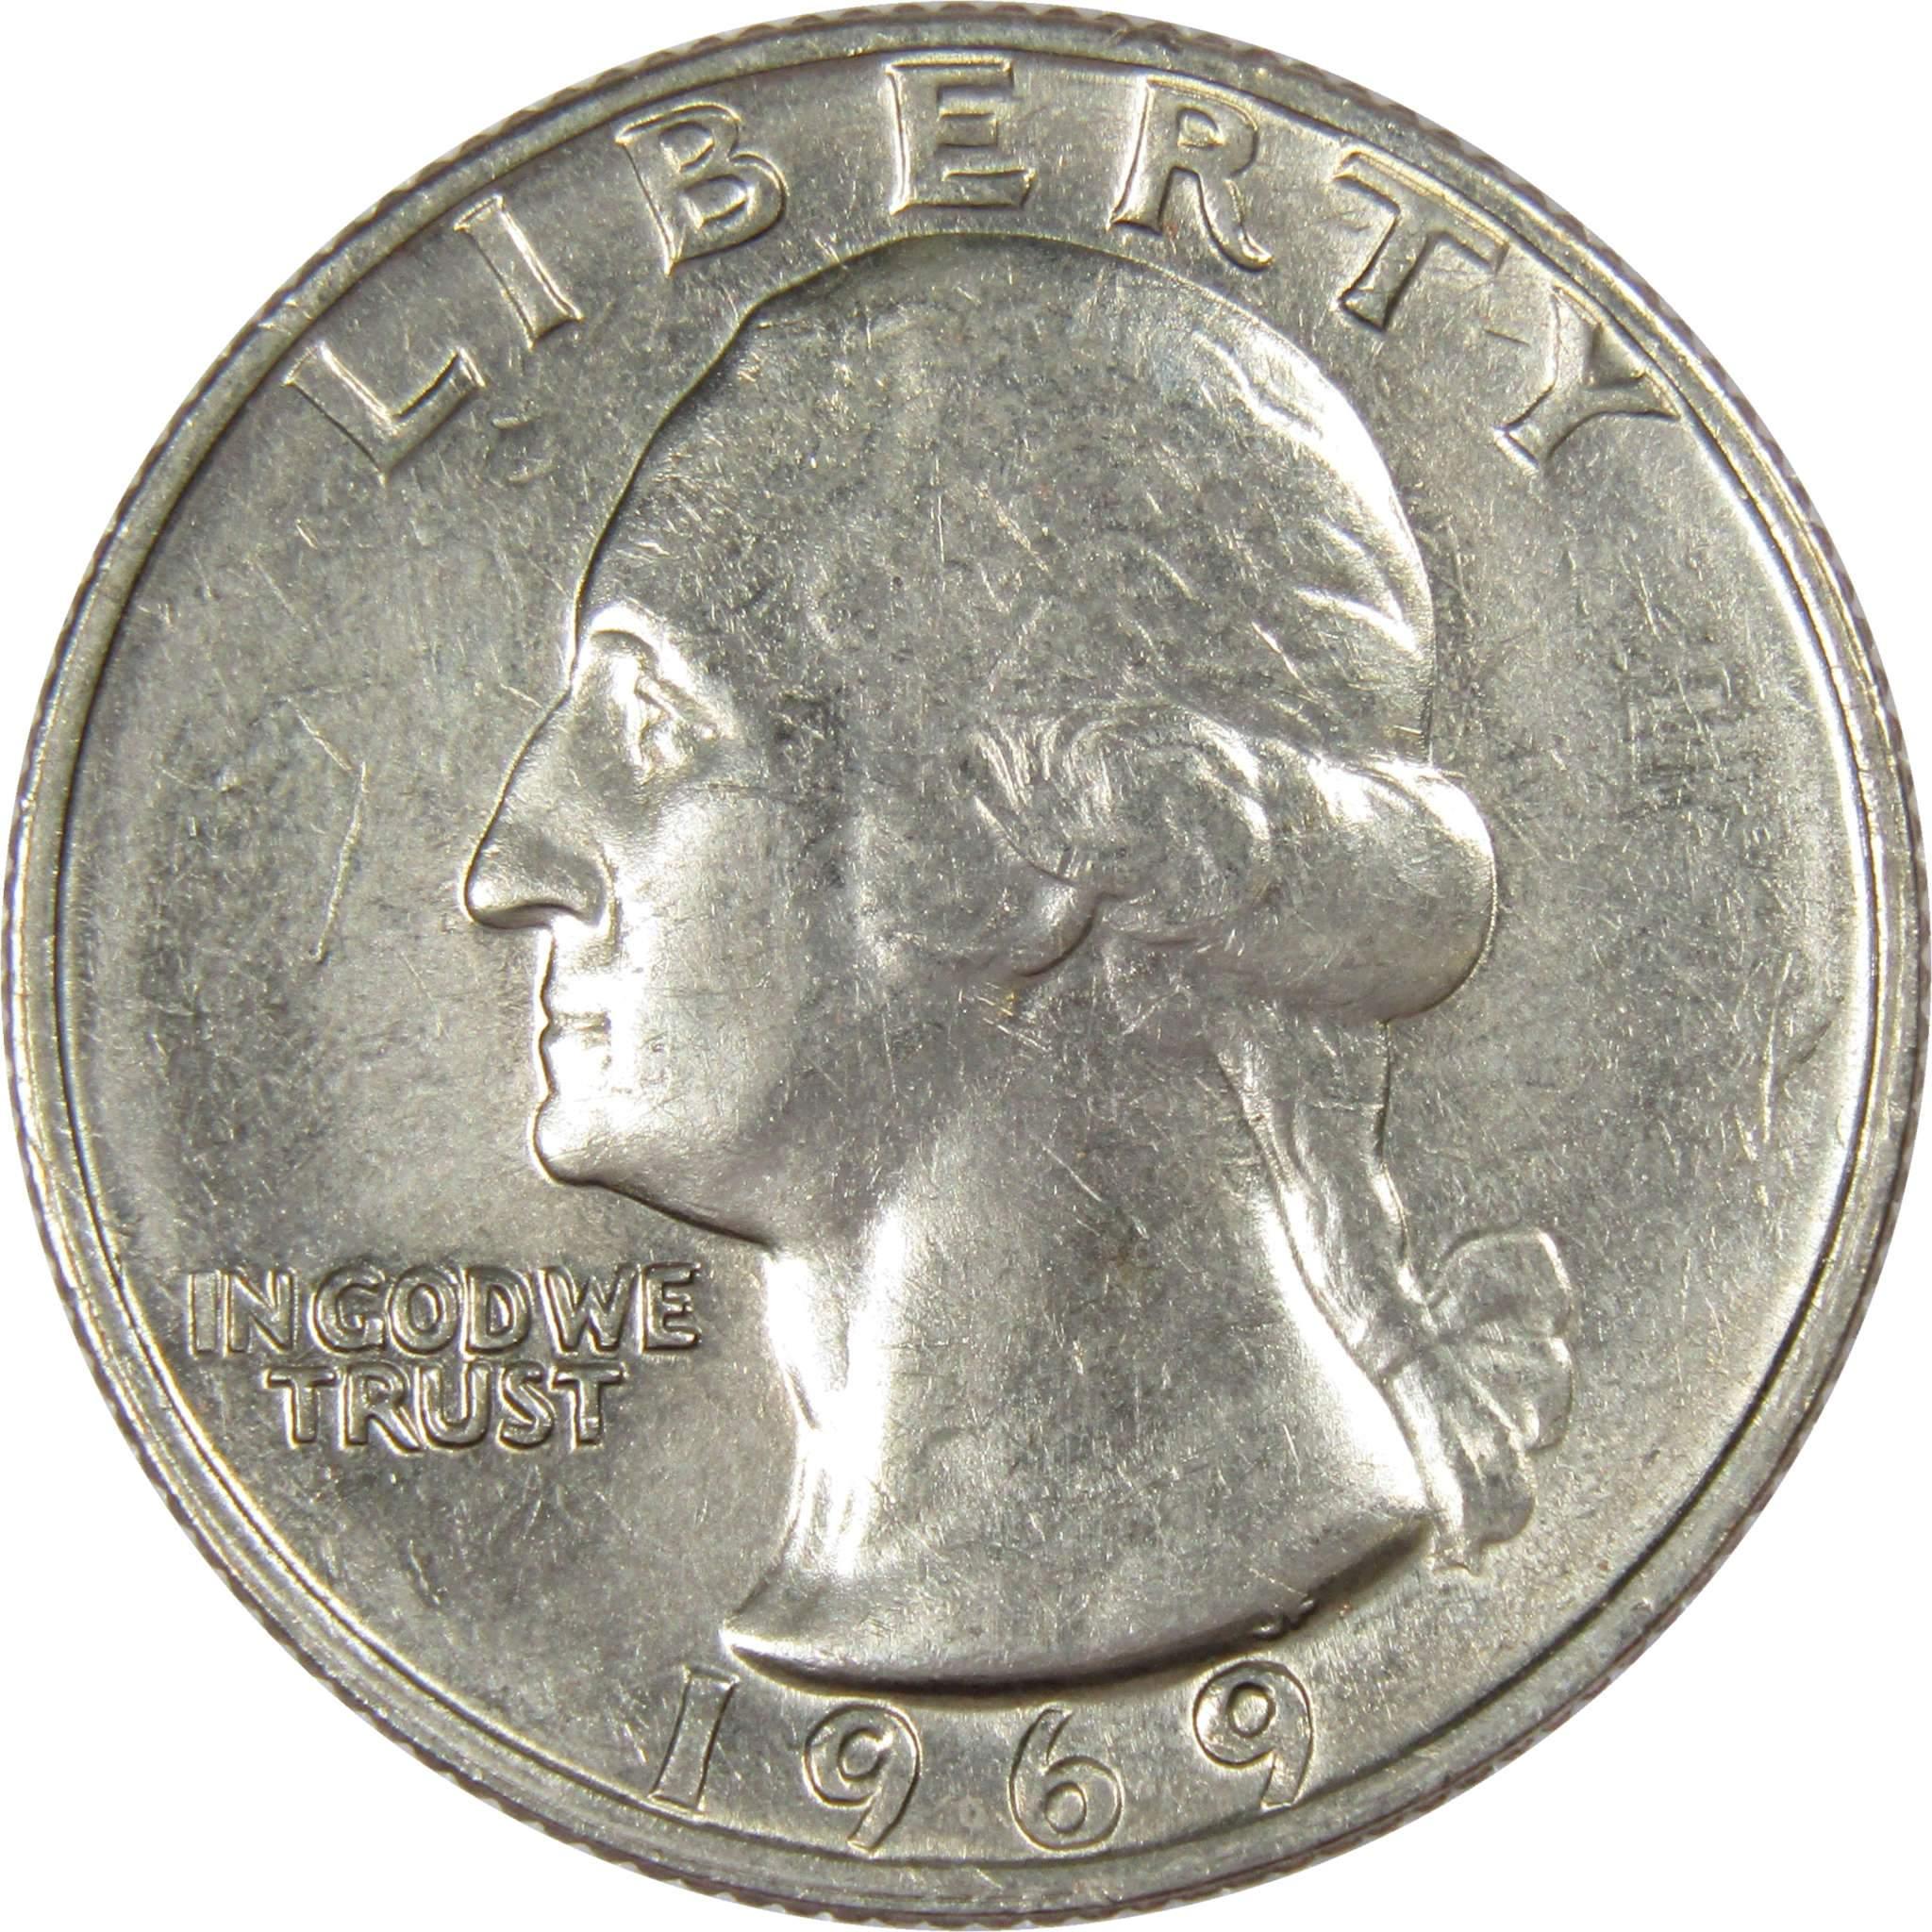 1969 Washington Quarter BU Uncirculated Mint State 25c US Coin Collectible